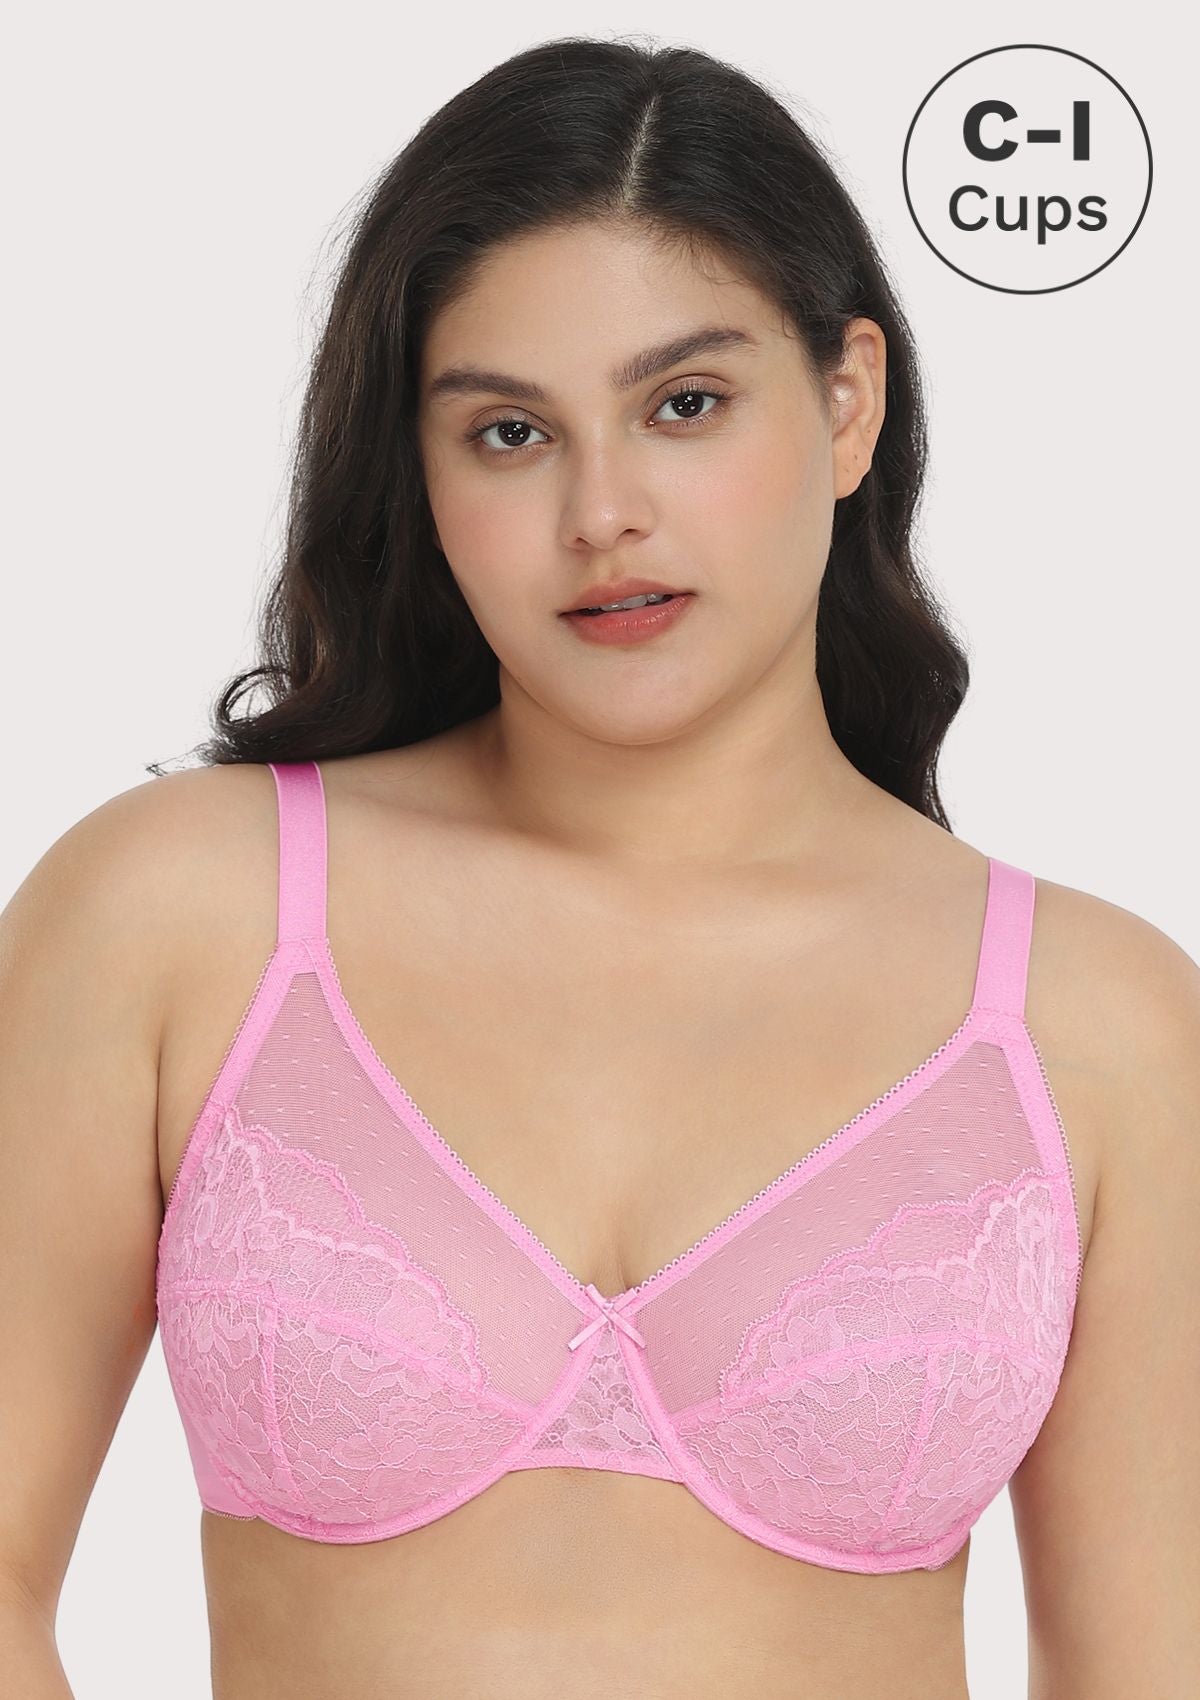 HSIA Enchante Lacy Bra: Comfy Sheer Lace Bra With Lift - Dusty Peach / 42 / D